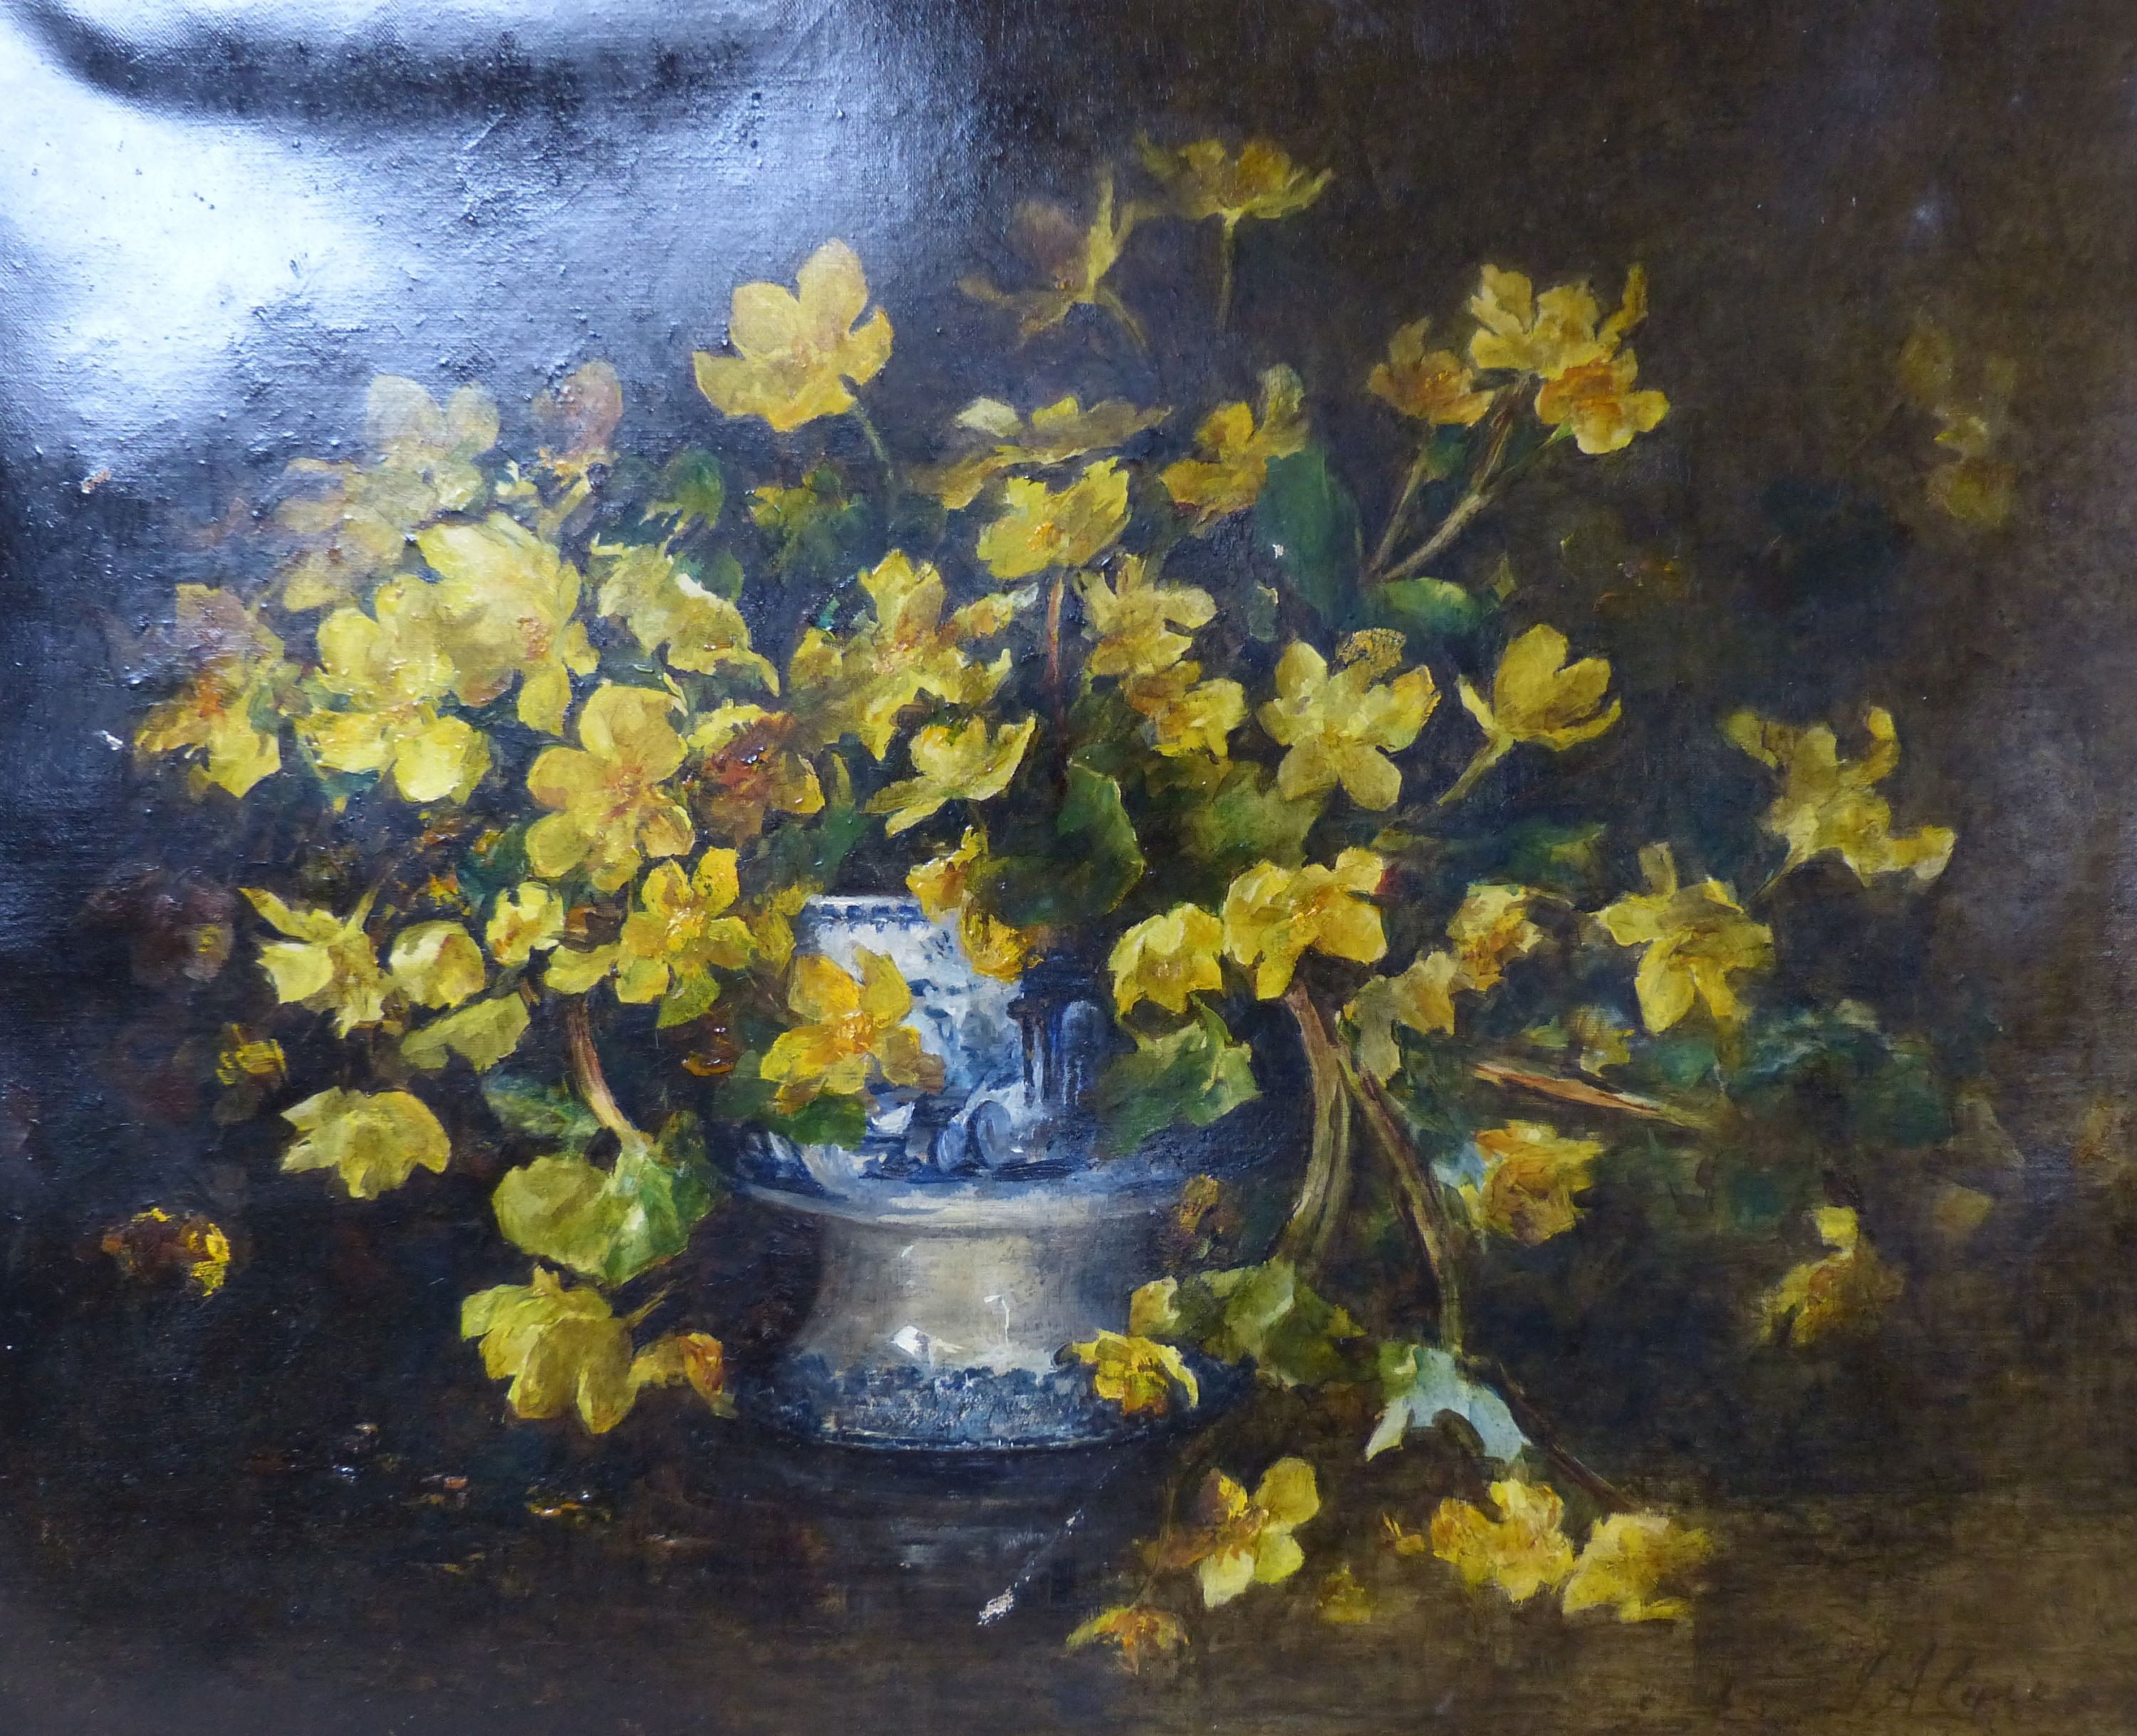 J.A. .... , oil on canvas, Still life of daffodils in a vase, signed, 46 x 56cm, unframed